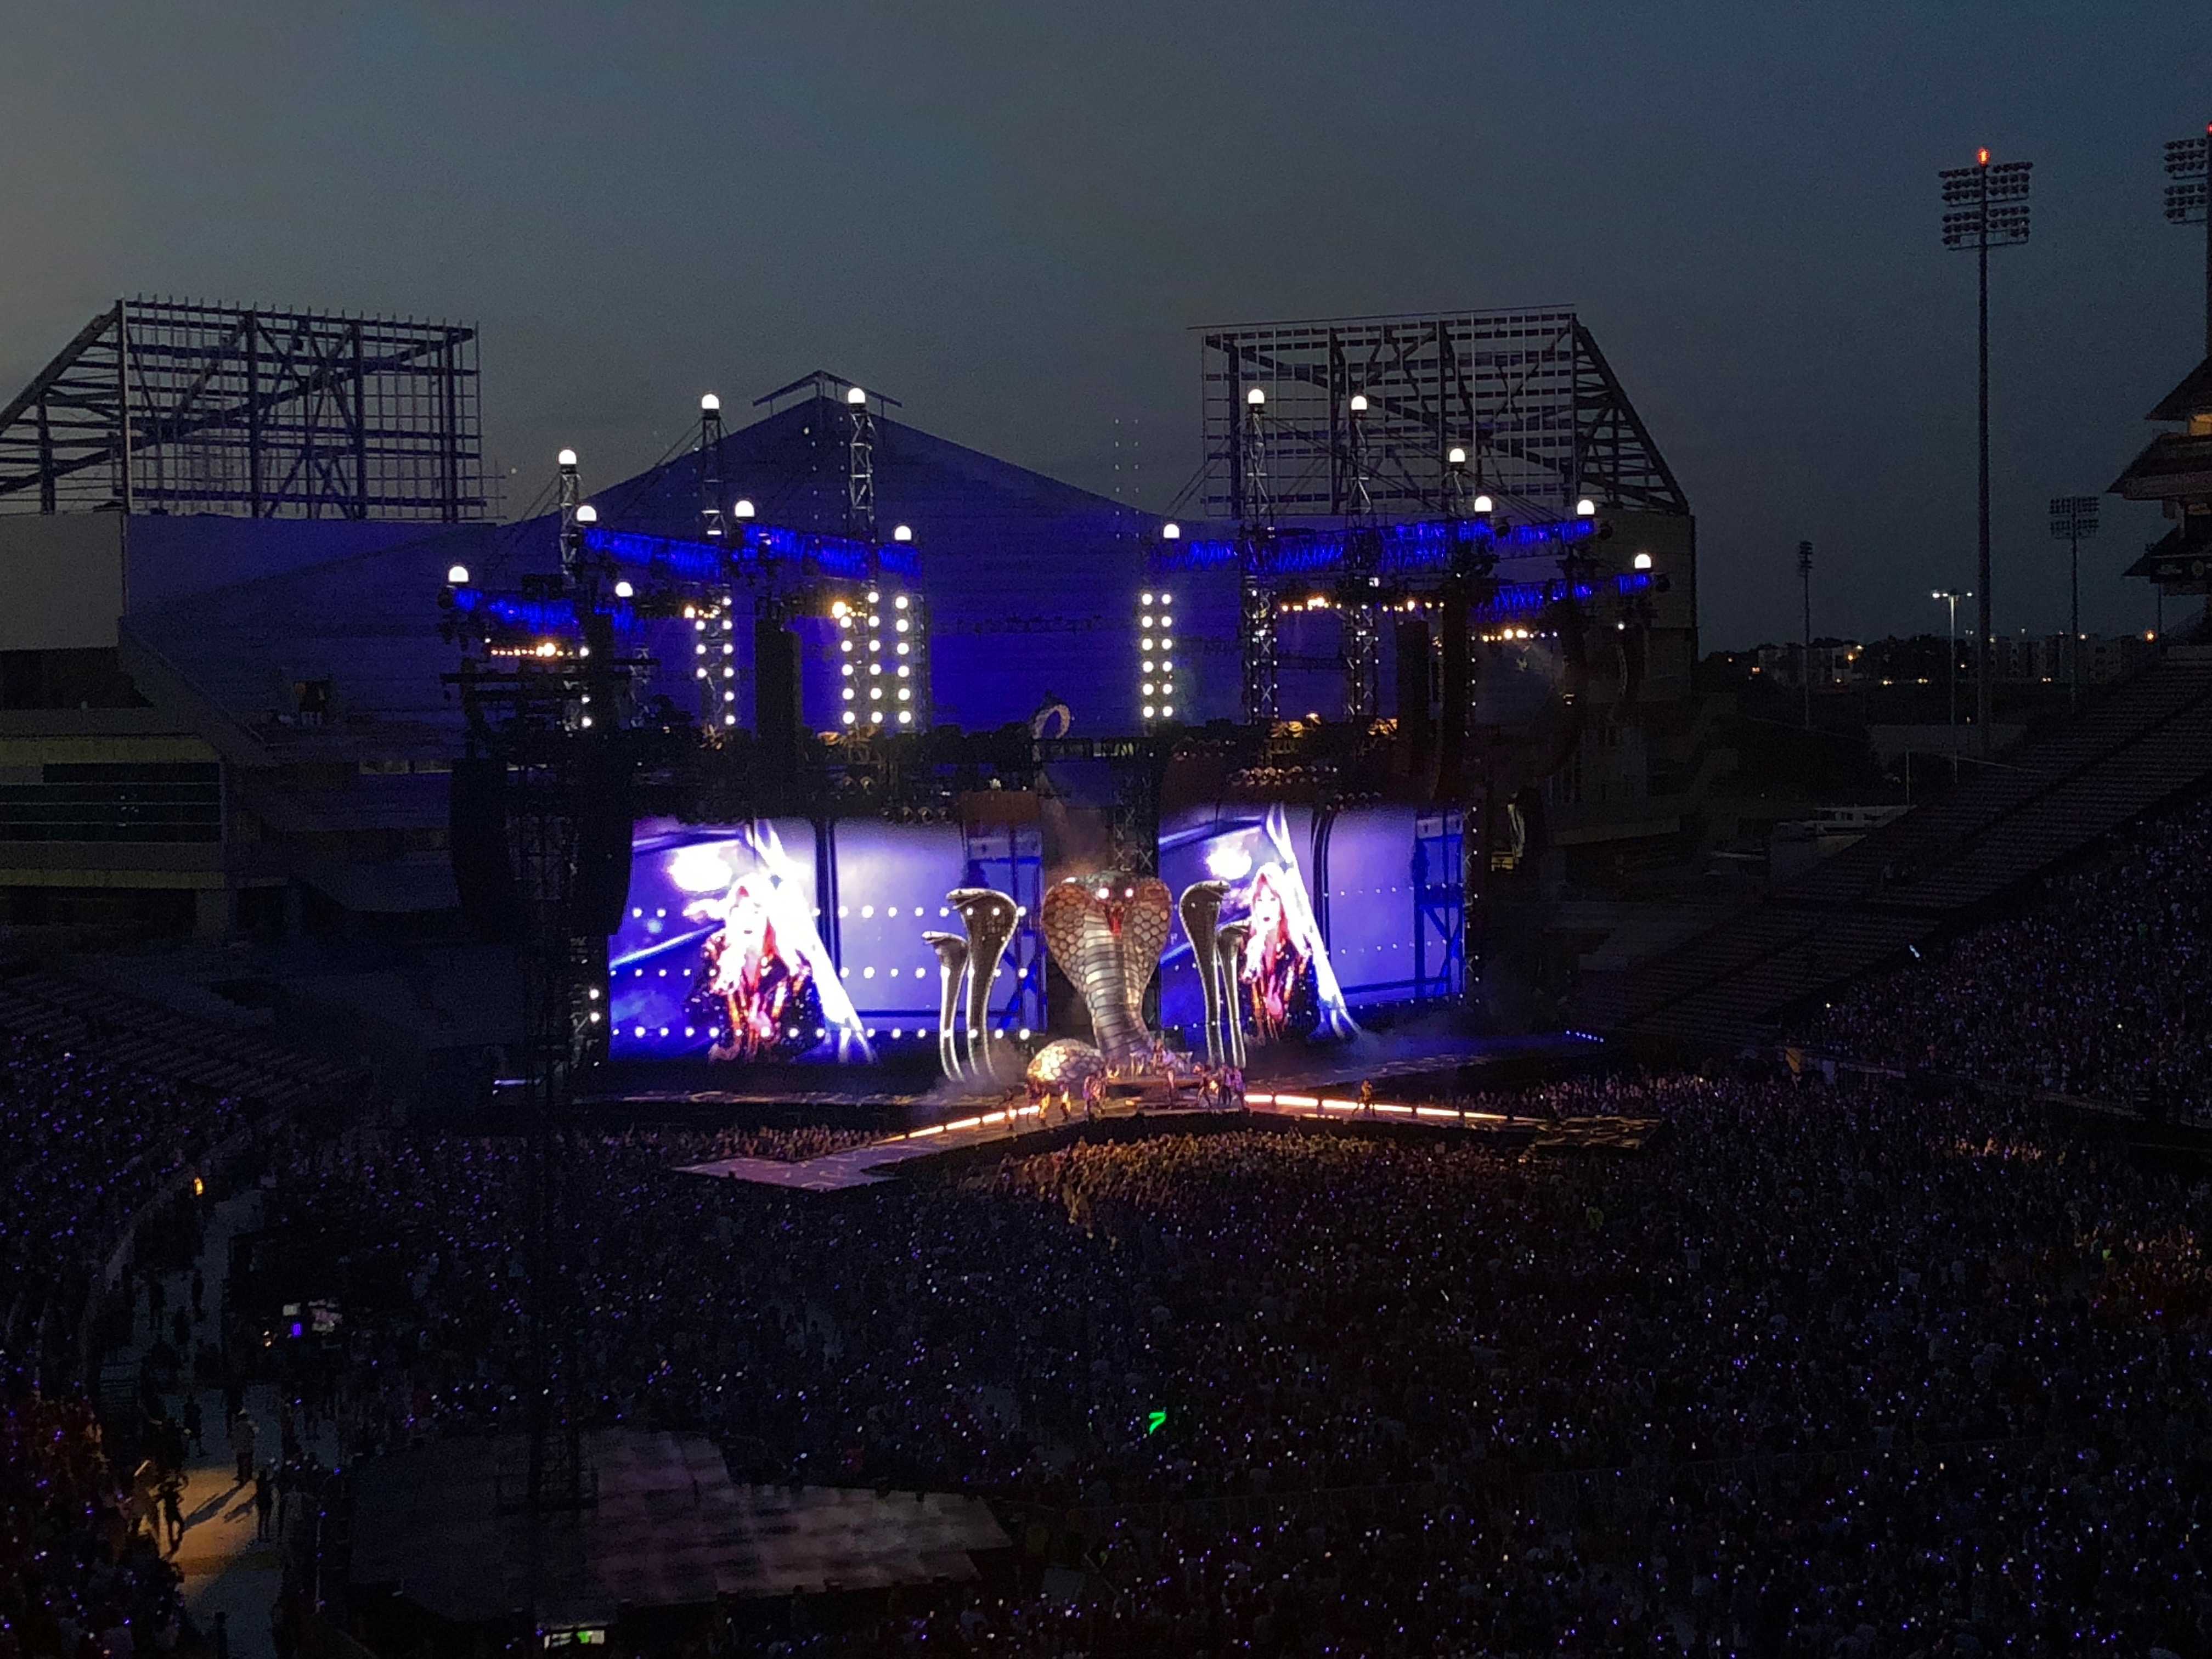 Taylor Swift performing Look What You Made Me Do at her Reputation Stadium Tour. Photo taken by Maddie Gamertsfelder.